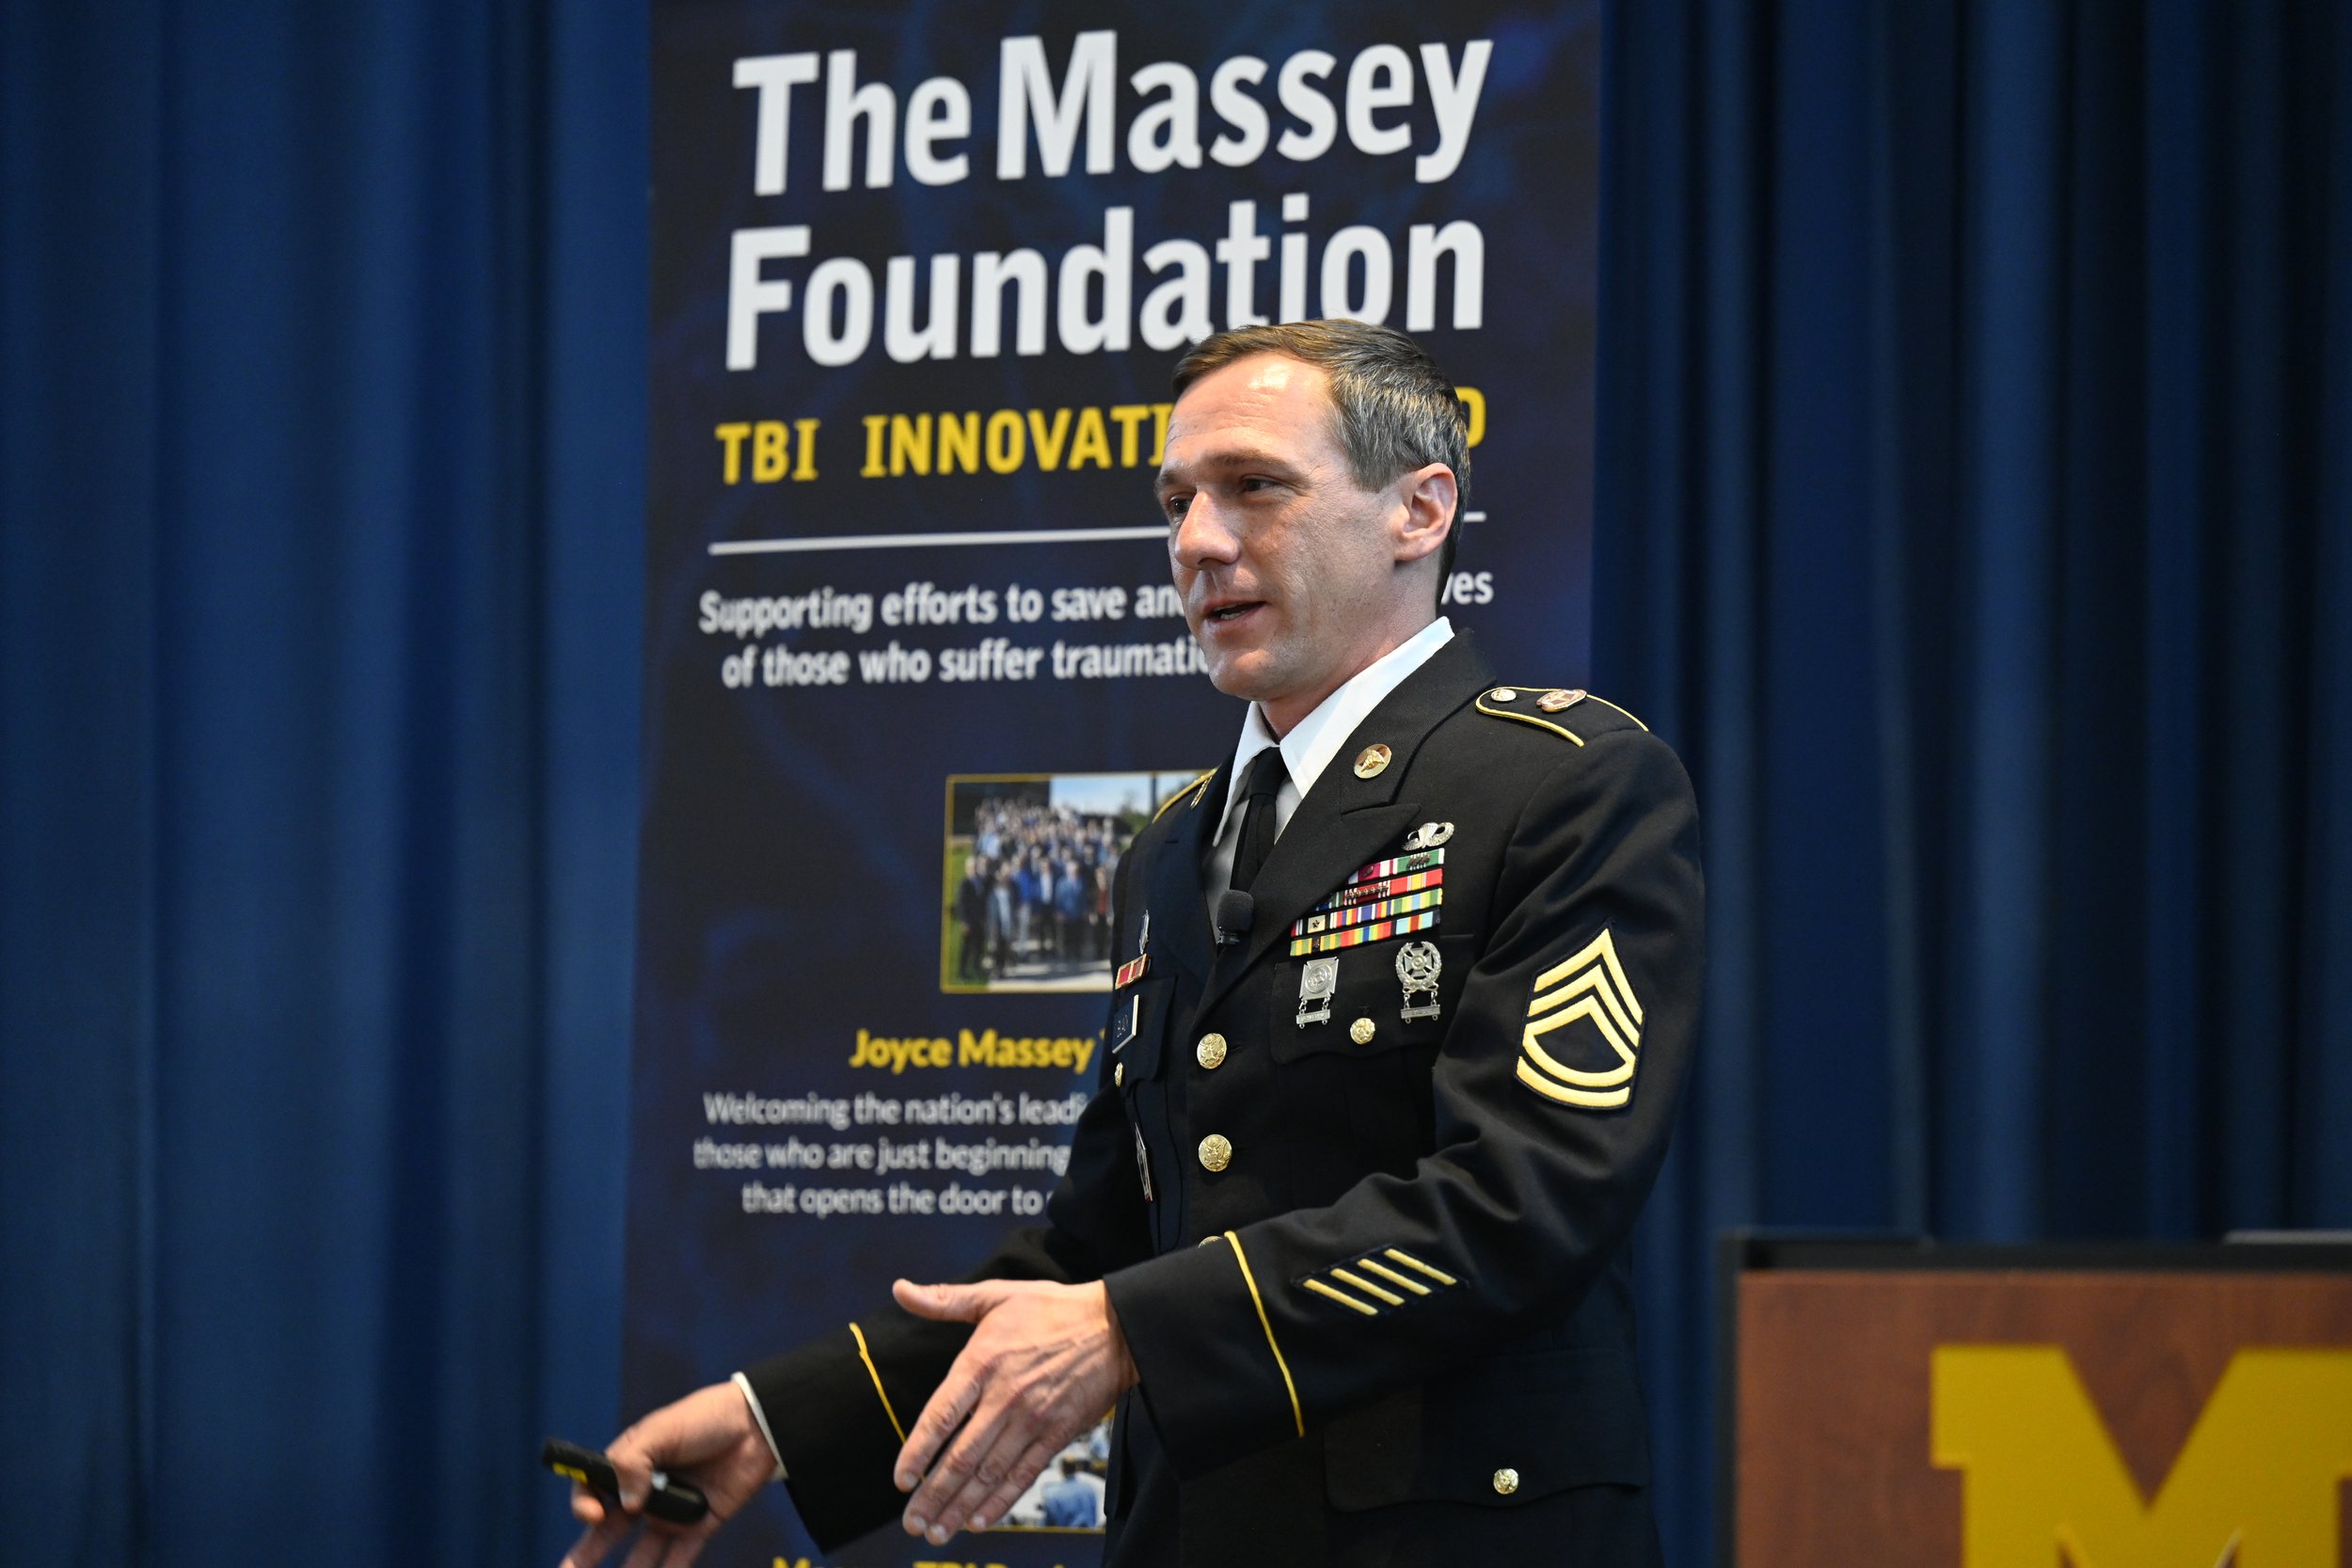  Sergeant First Class Hunter Black, Senior Enlisted Advisor for the U.S. Army Medical Materiel Development Activity, spoke on how the various research branches of the Department of Defense work together, as well as what they look for when funding TBI